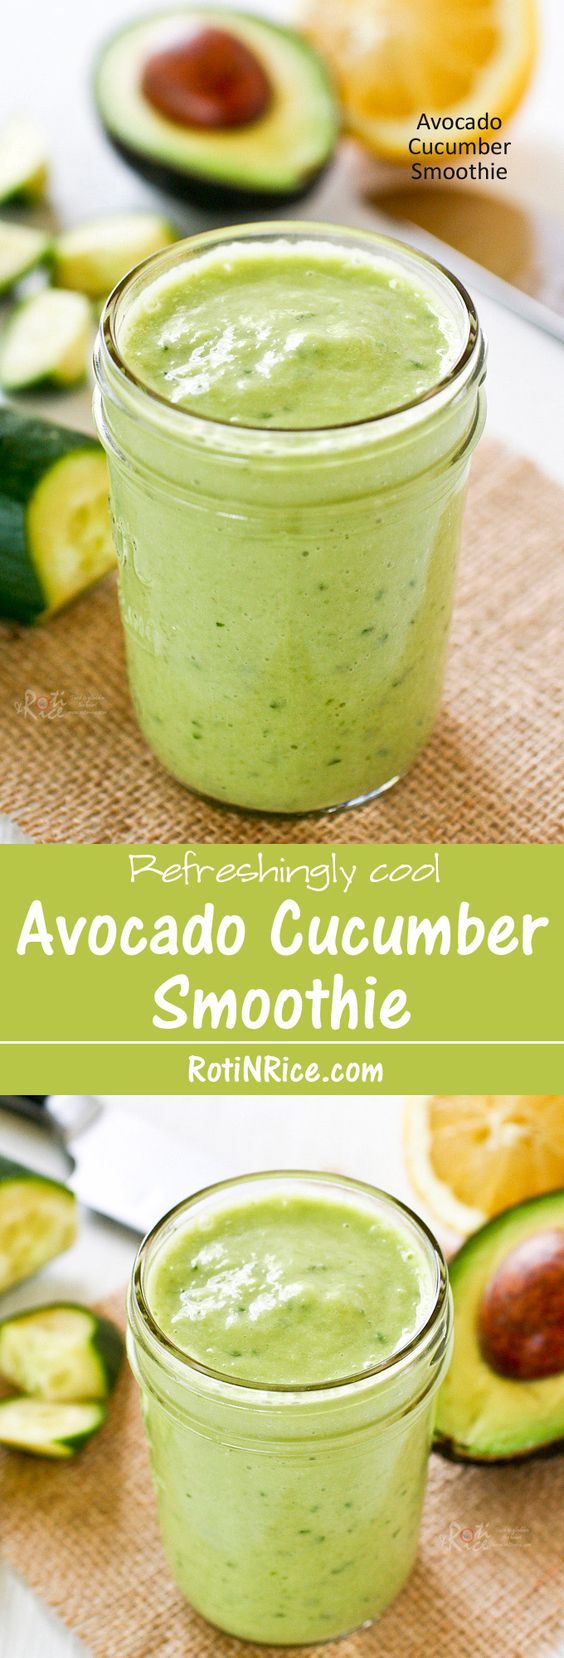 Add this avocado cucumber smoothie to your daily smoothie mainstays for breakfast. Read more about balanced smoothie recipes. #healthyeating #mealprep #nutrition #healthyrecipes #healthylifestyle #healthylife #healthy #wellness #nobake